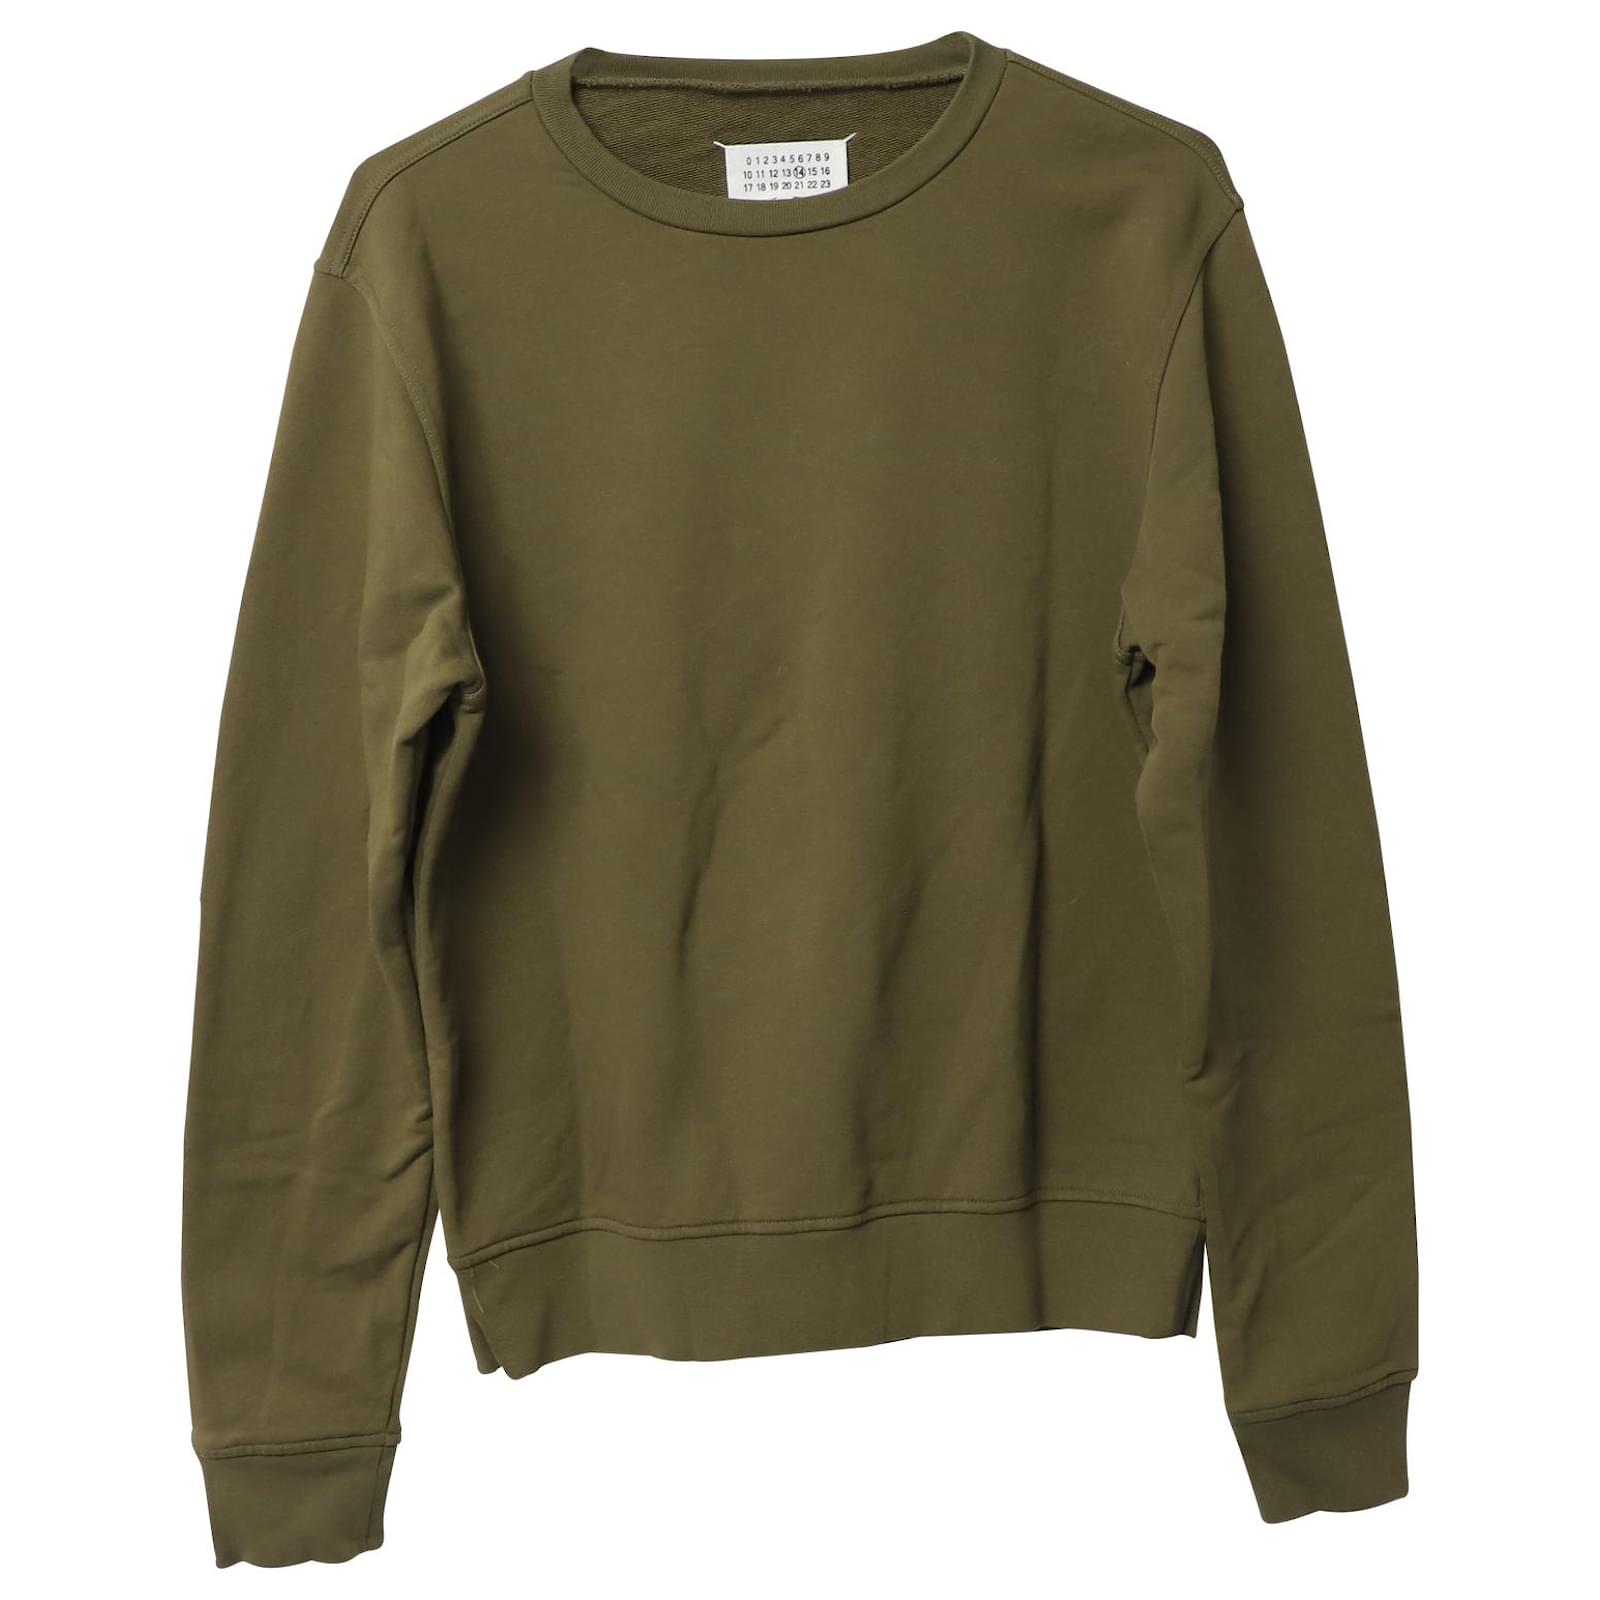 Maison Martin Margiela Maison Margiela Sweater with Elbow-Patch in ...